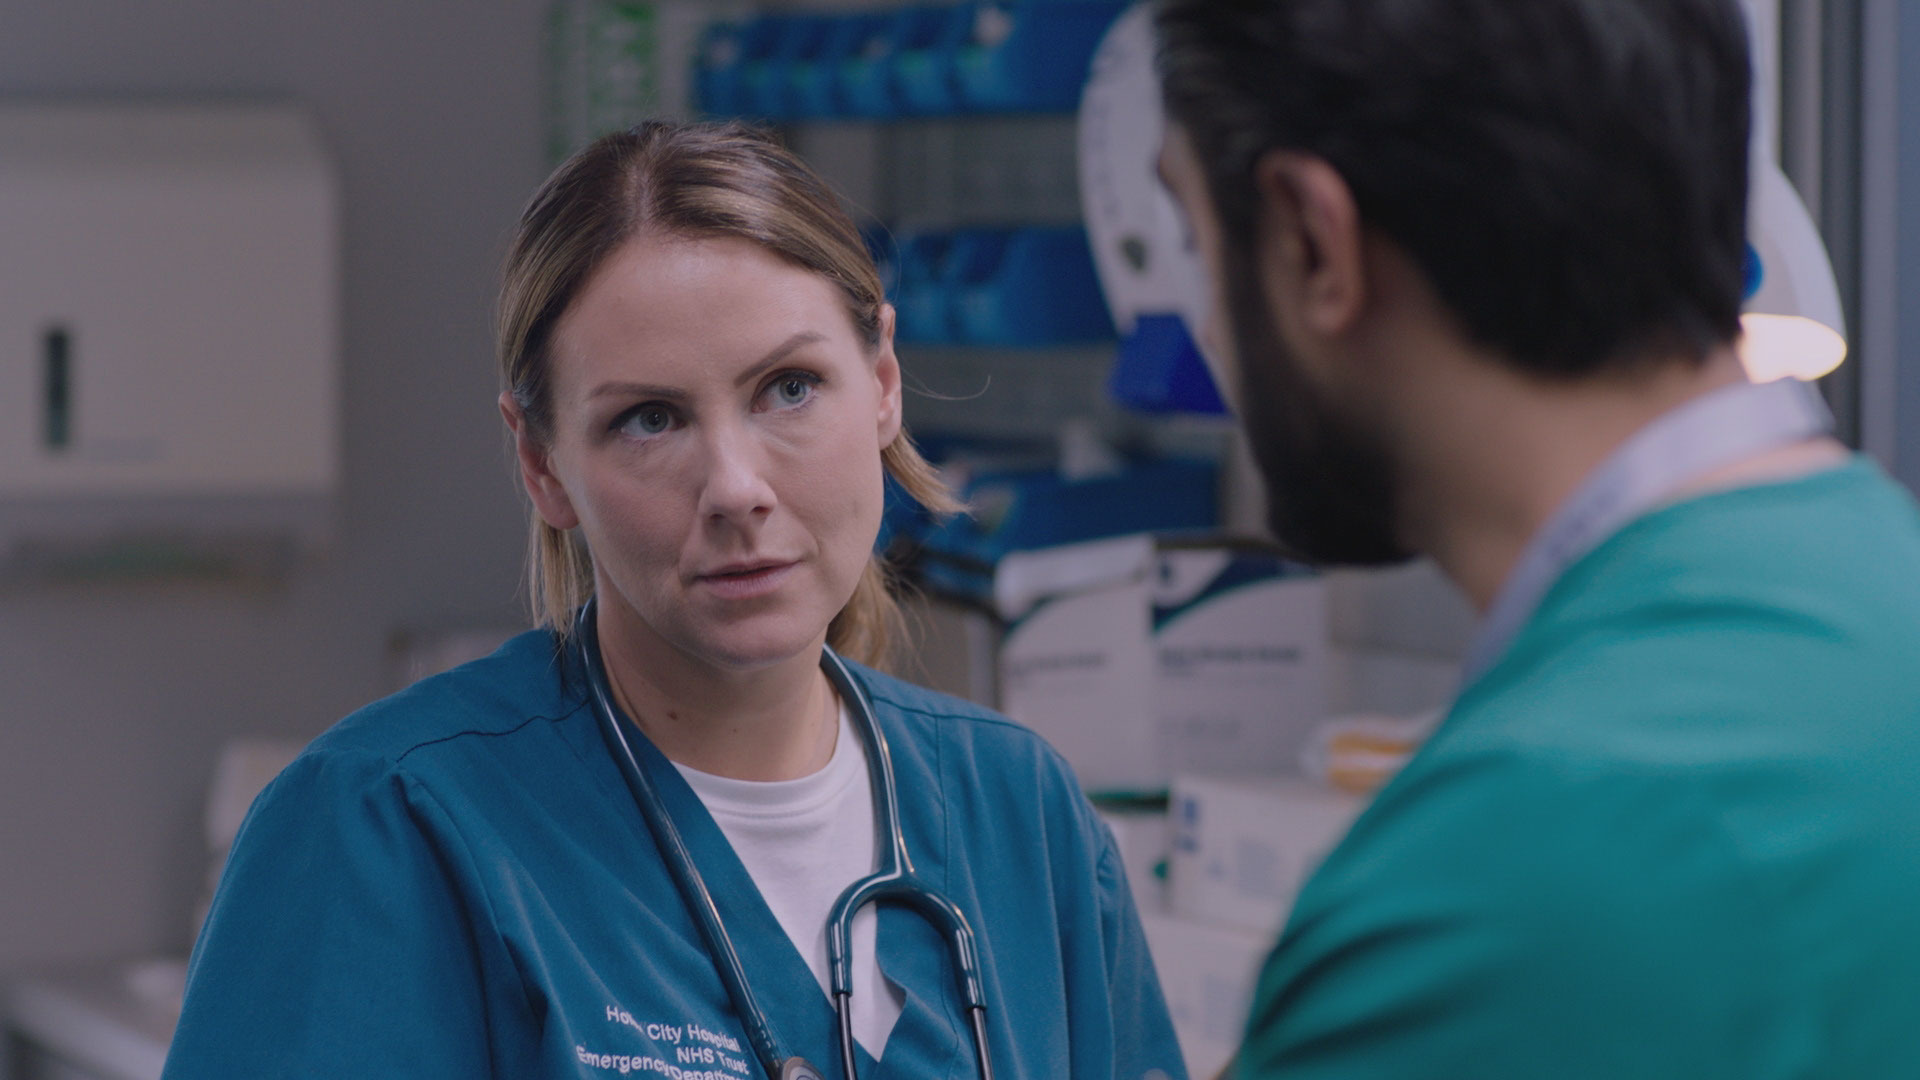 Casualty Stevie and Dylan team up against Patrick